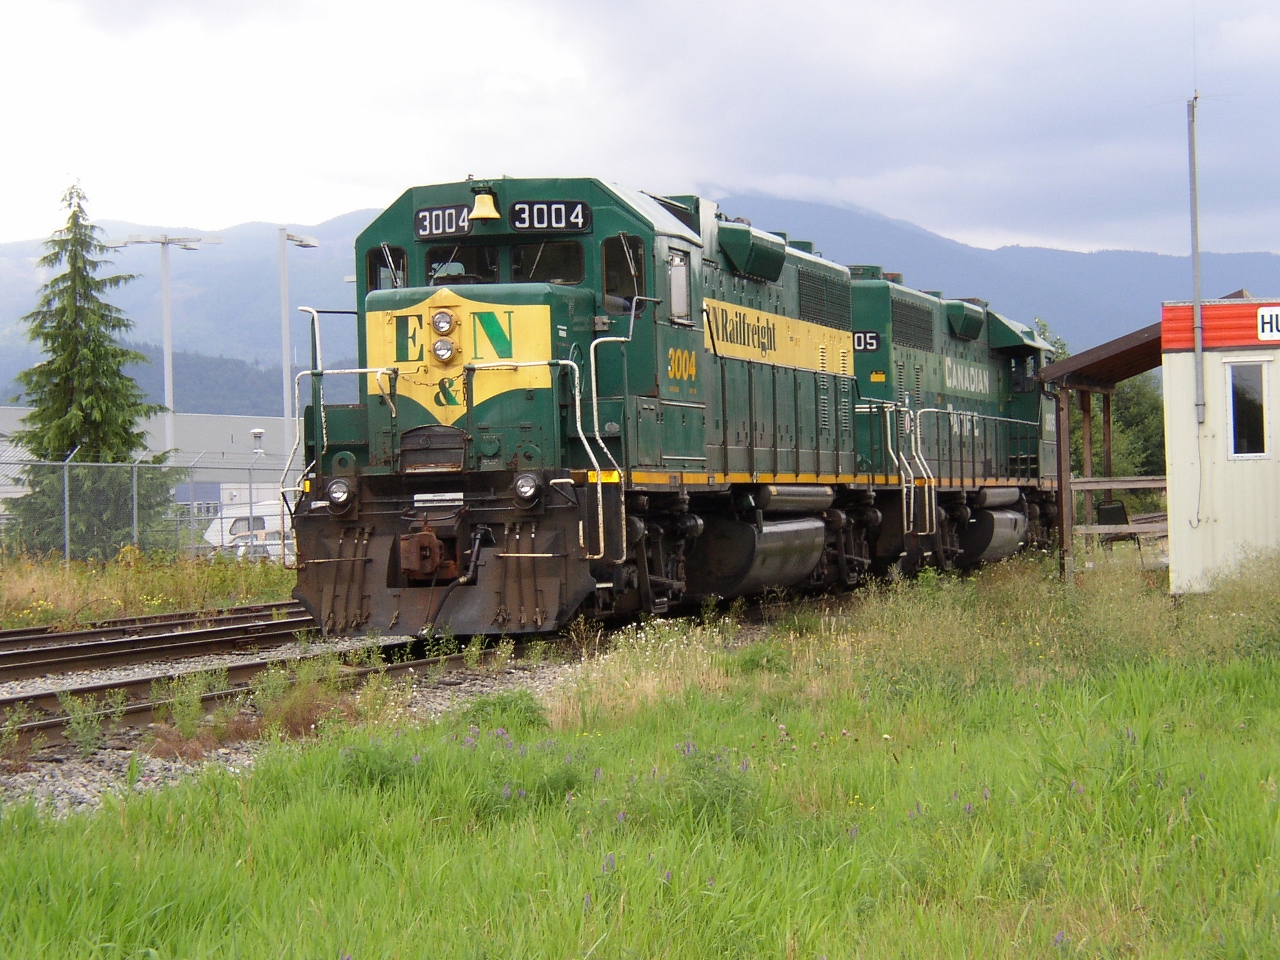 Usually something at this location. So I drove down to the border, & sitting there were two of my favorite CP locomotives. Always liked the green & yellow colours. Photographed them often while they on Vancouver Island. Last time I saw them together!